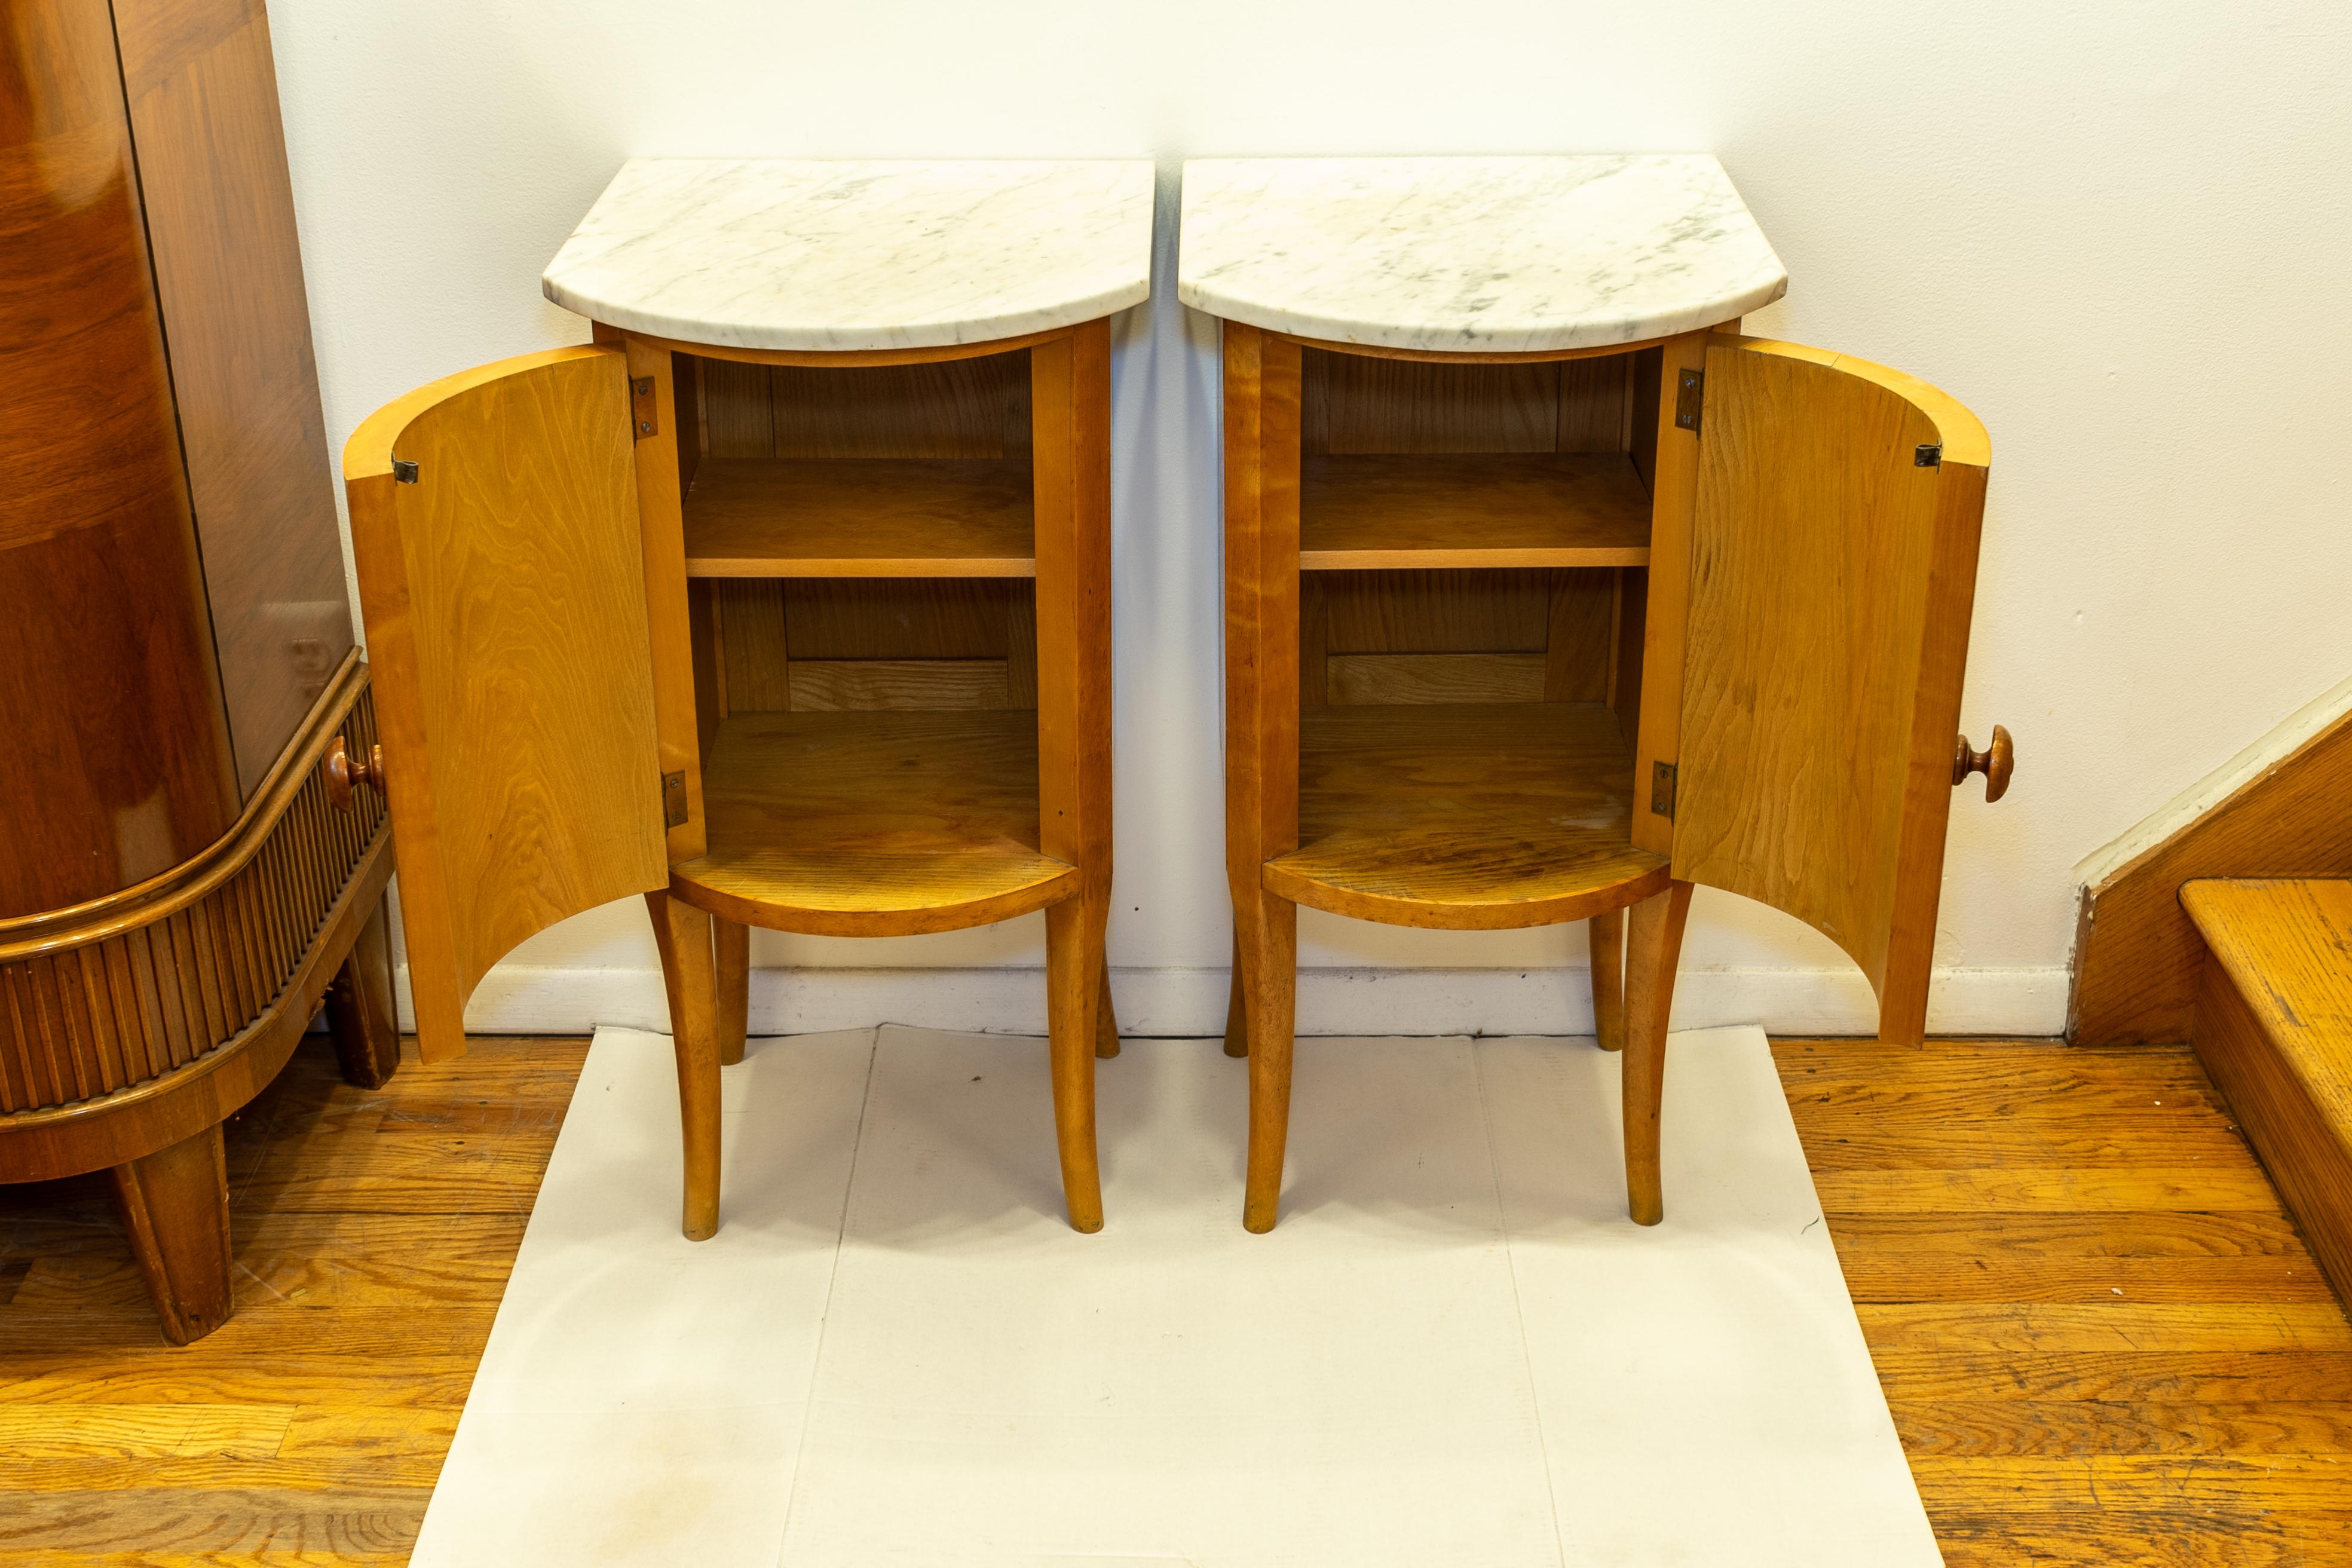 Burlwood veneers adorn all facing sides of this lovely pair of nightstands. Interior storage is ample and construction is rock solid. Topped by nicely figured marble.

Marble tops are removable and may easily be replaced.
